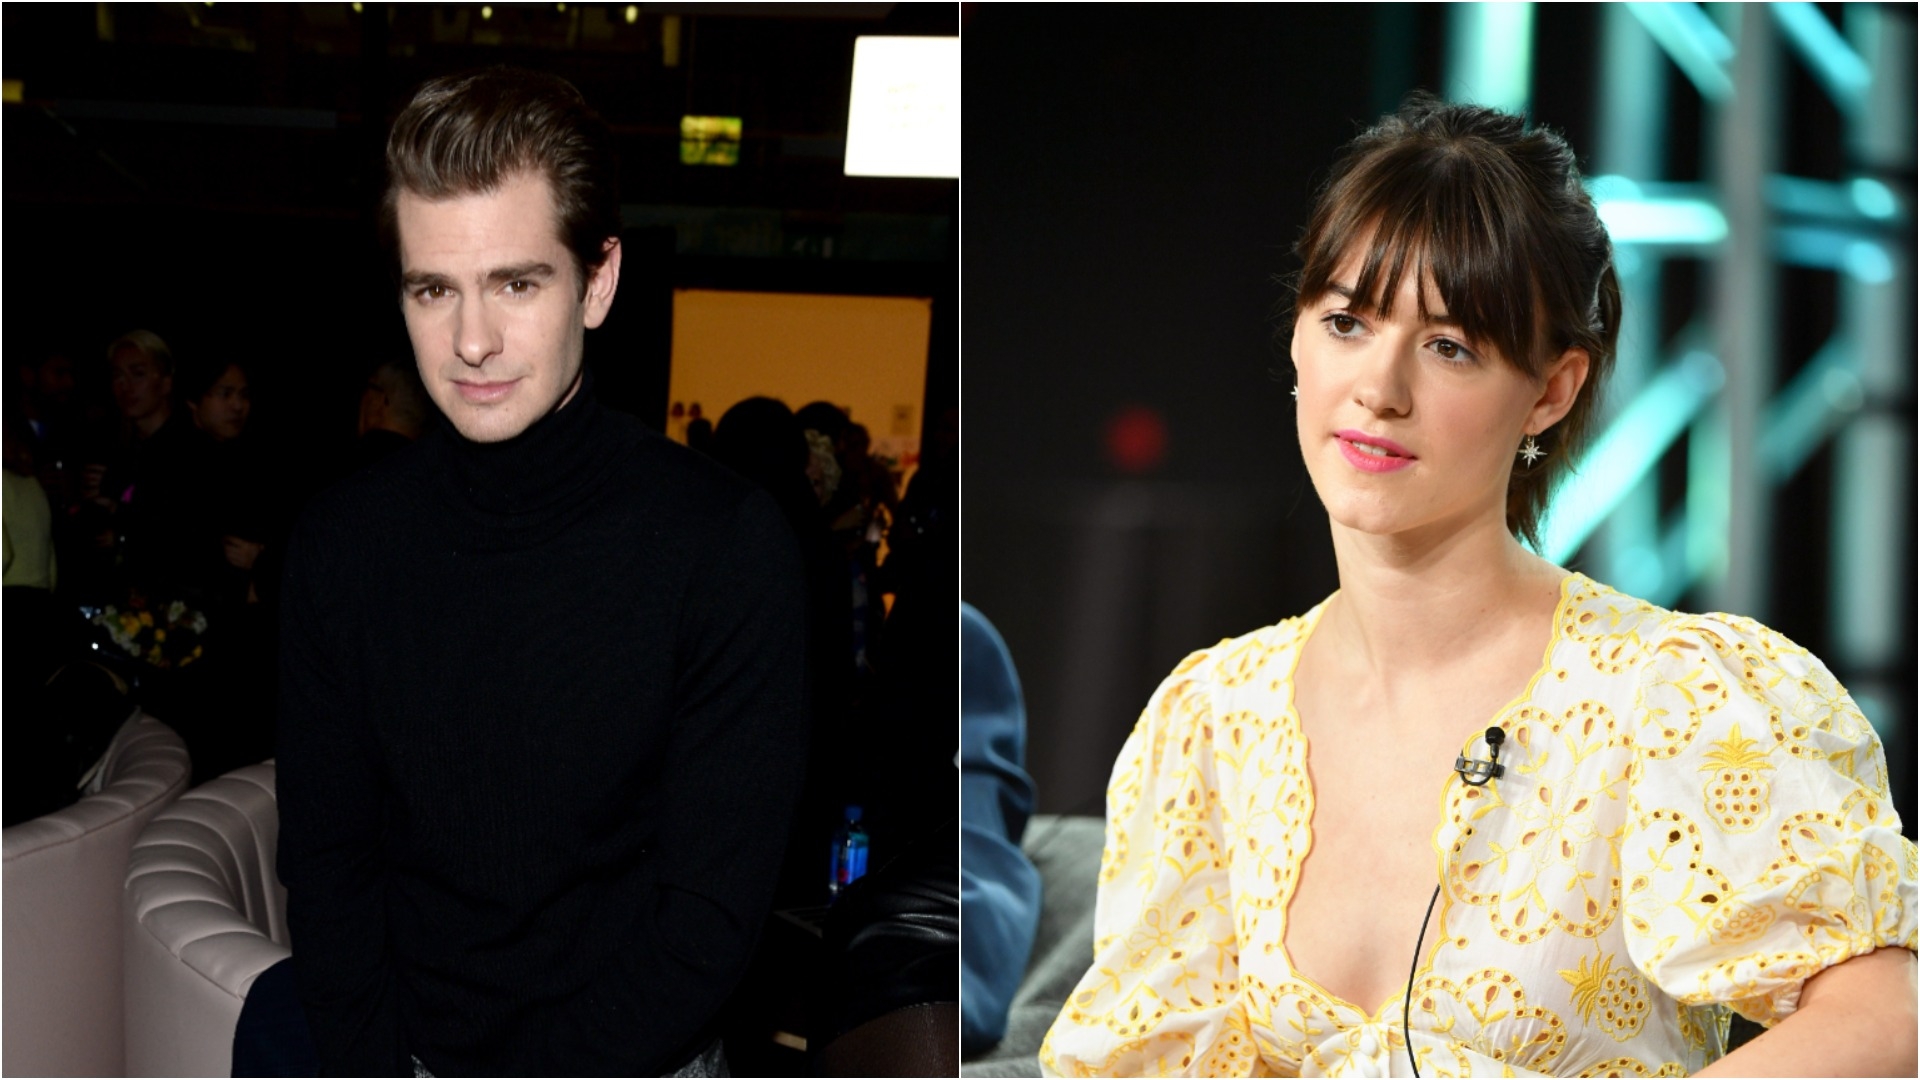 Andrew Garfield and Daisy Edgar-Jones to star in FX's Under the Banner of Heaven